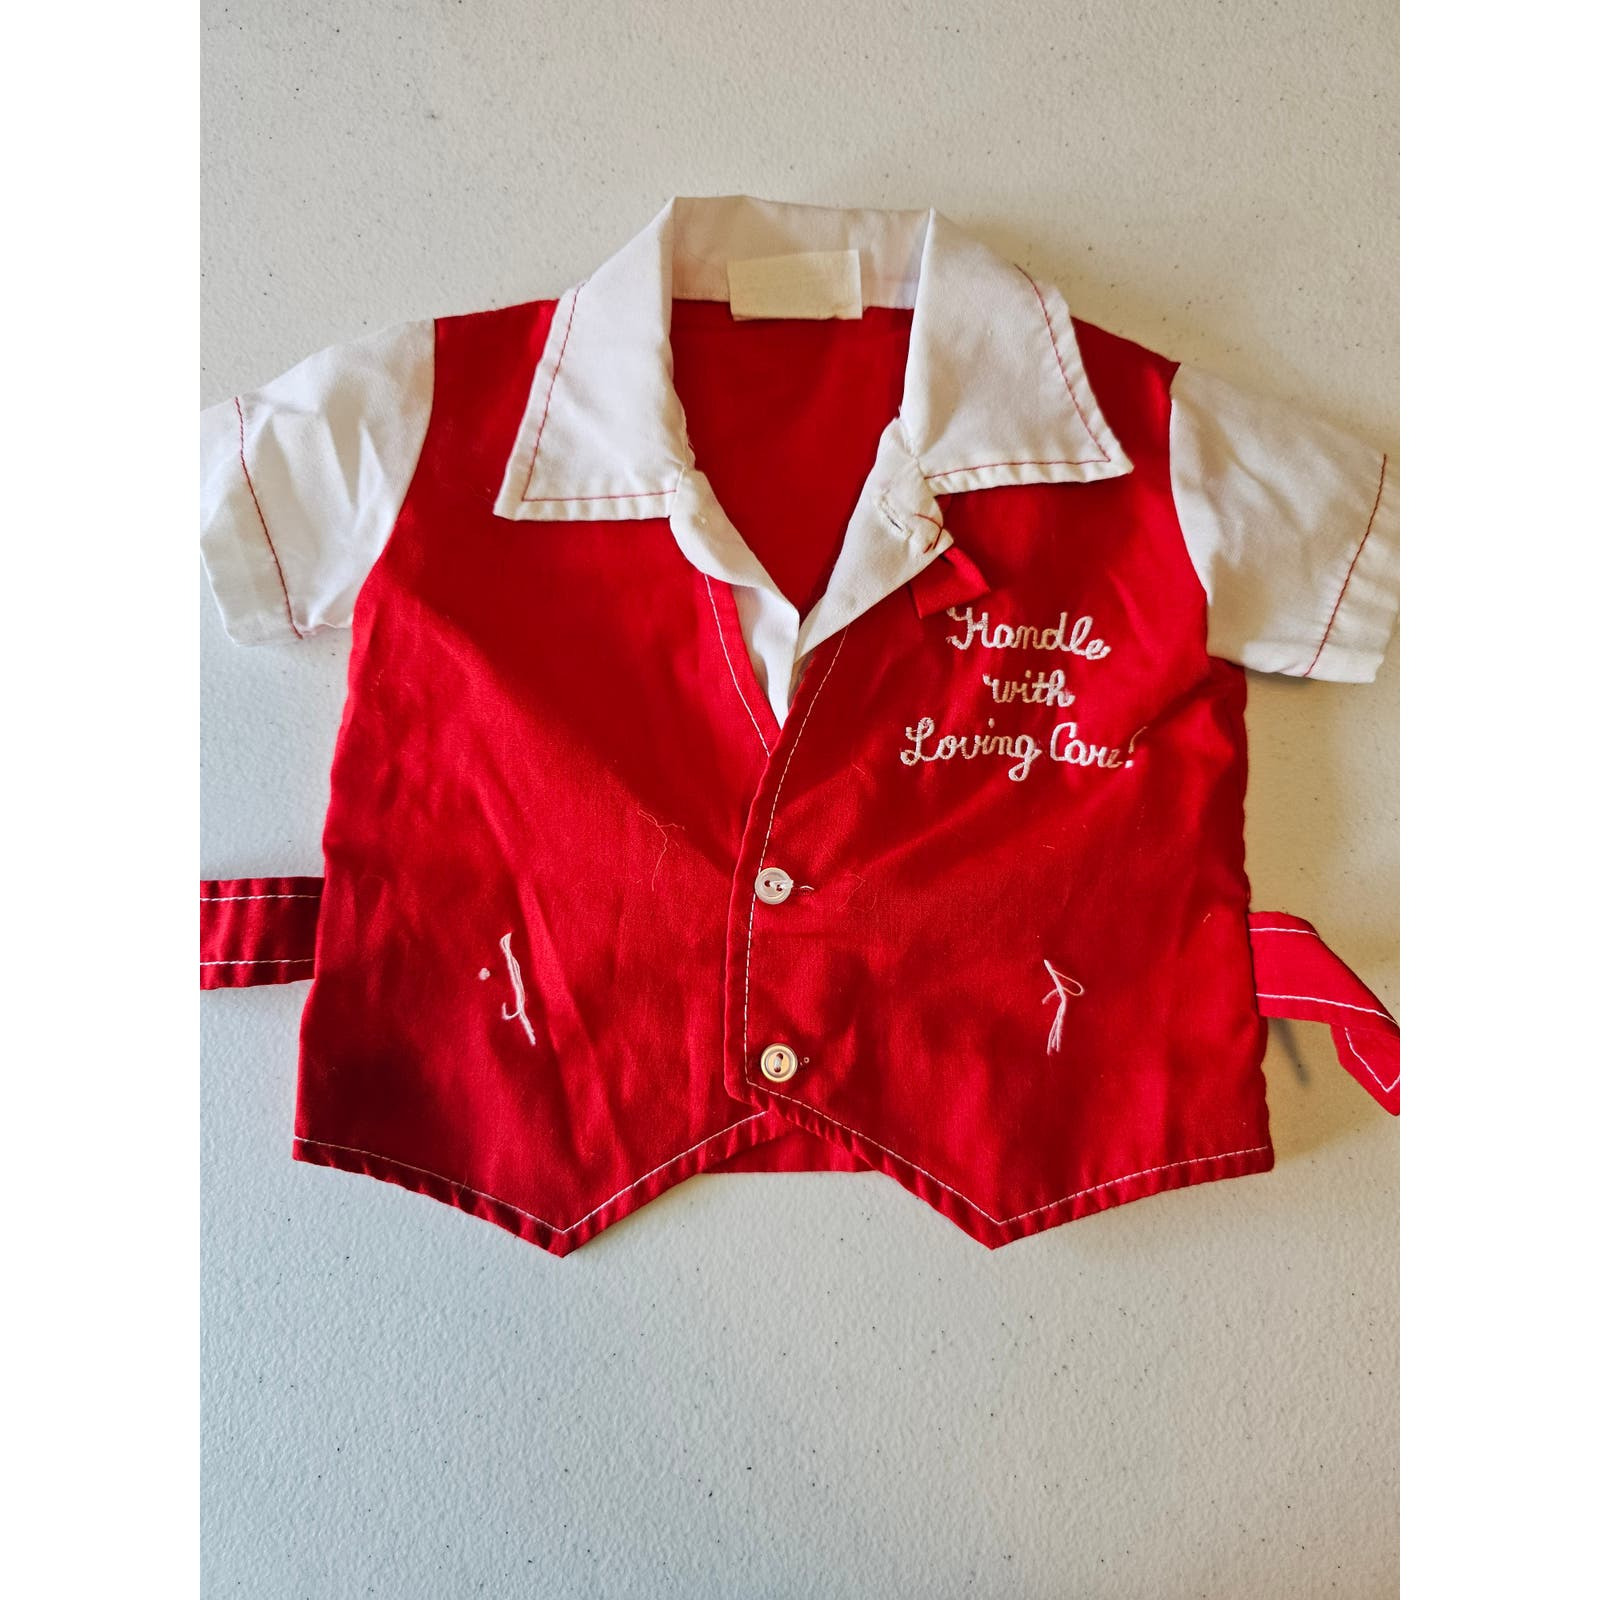 Vintage 1960s Baby Sz 0-3M Short Sleeve Shirt Red Embroidered Handle With Care